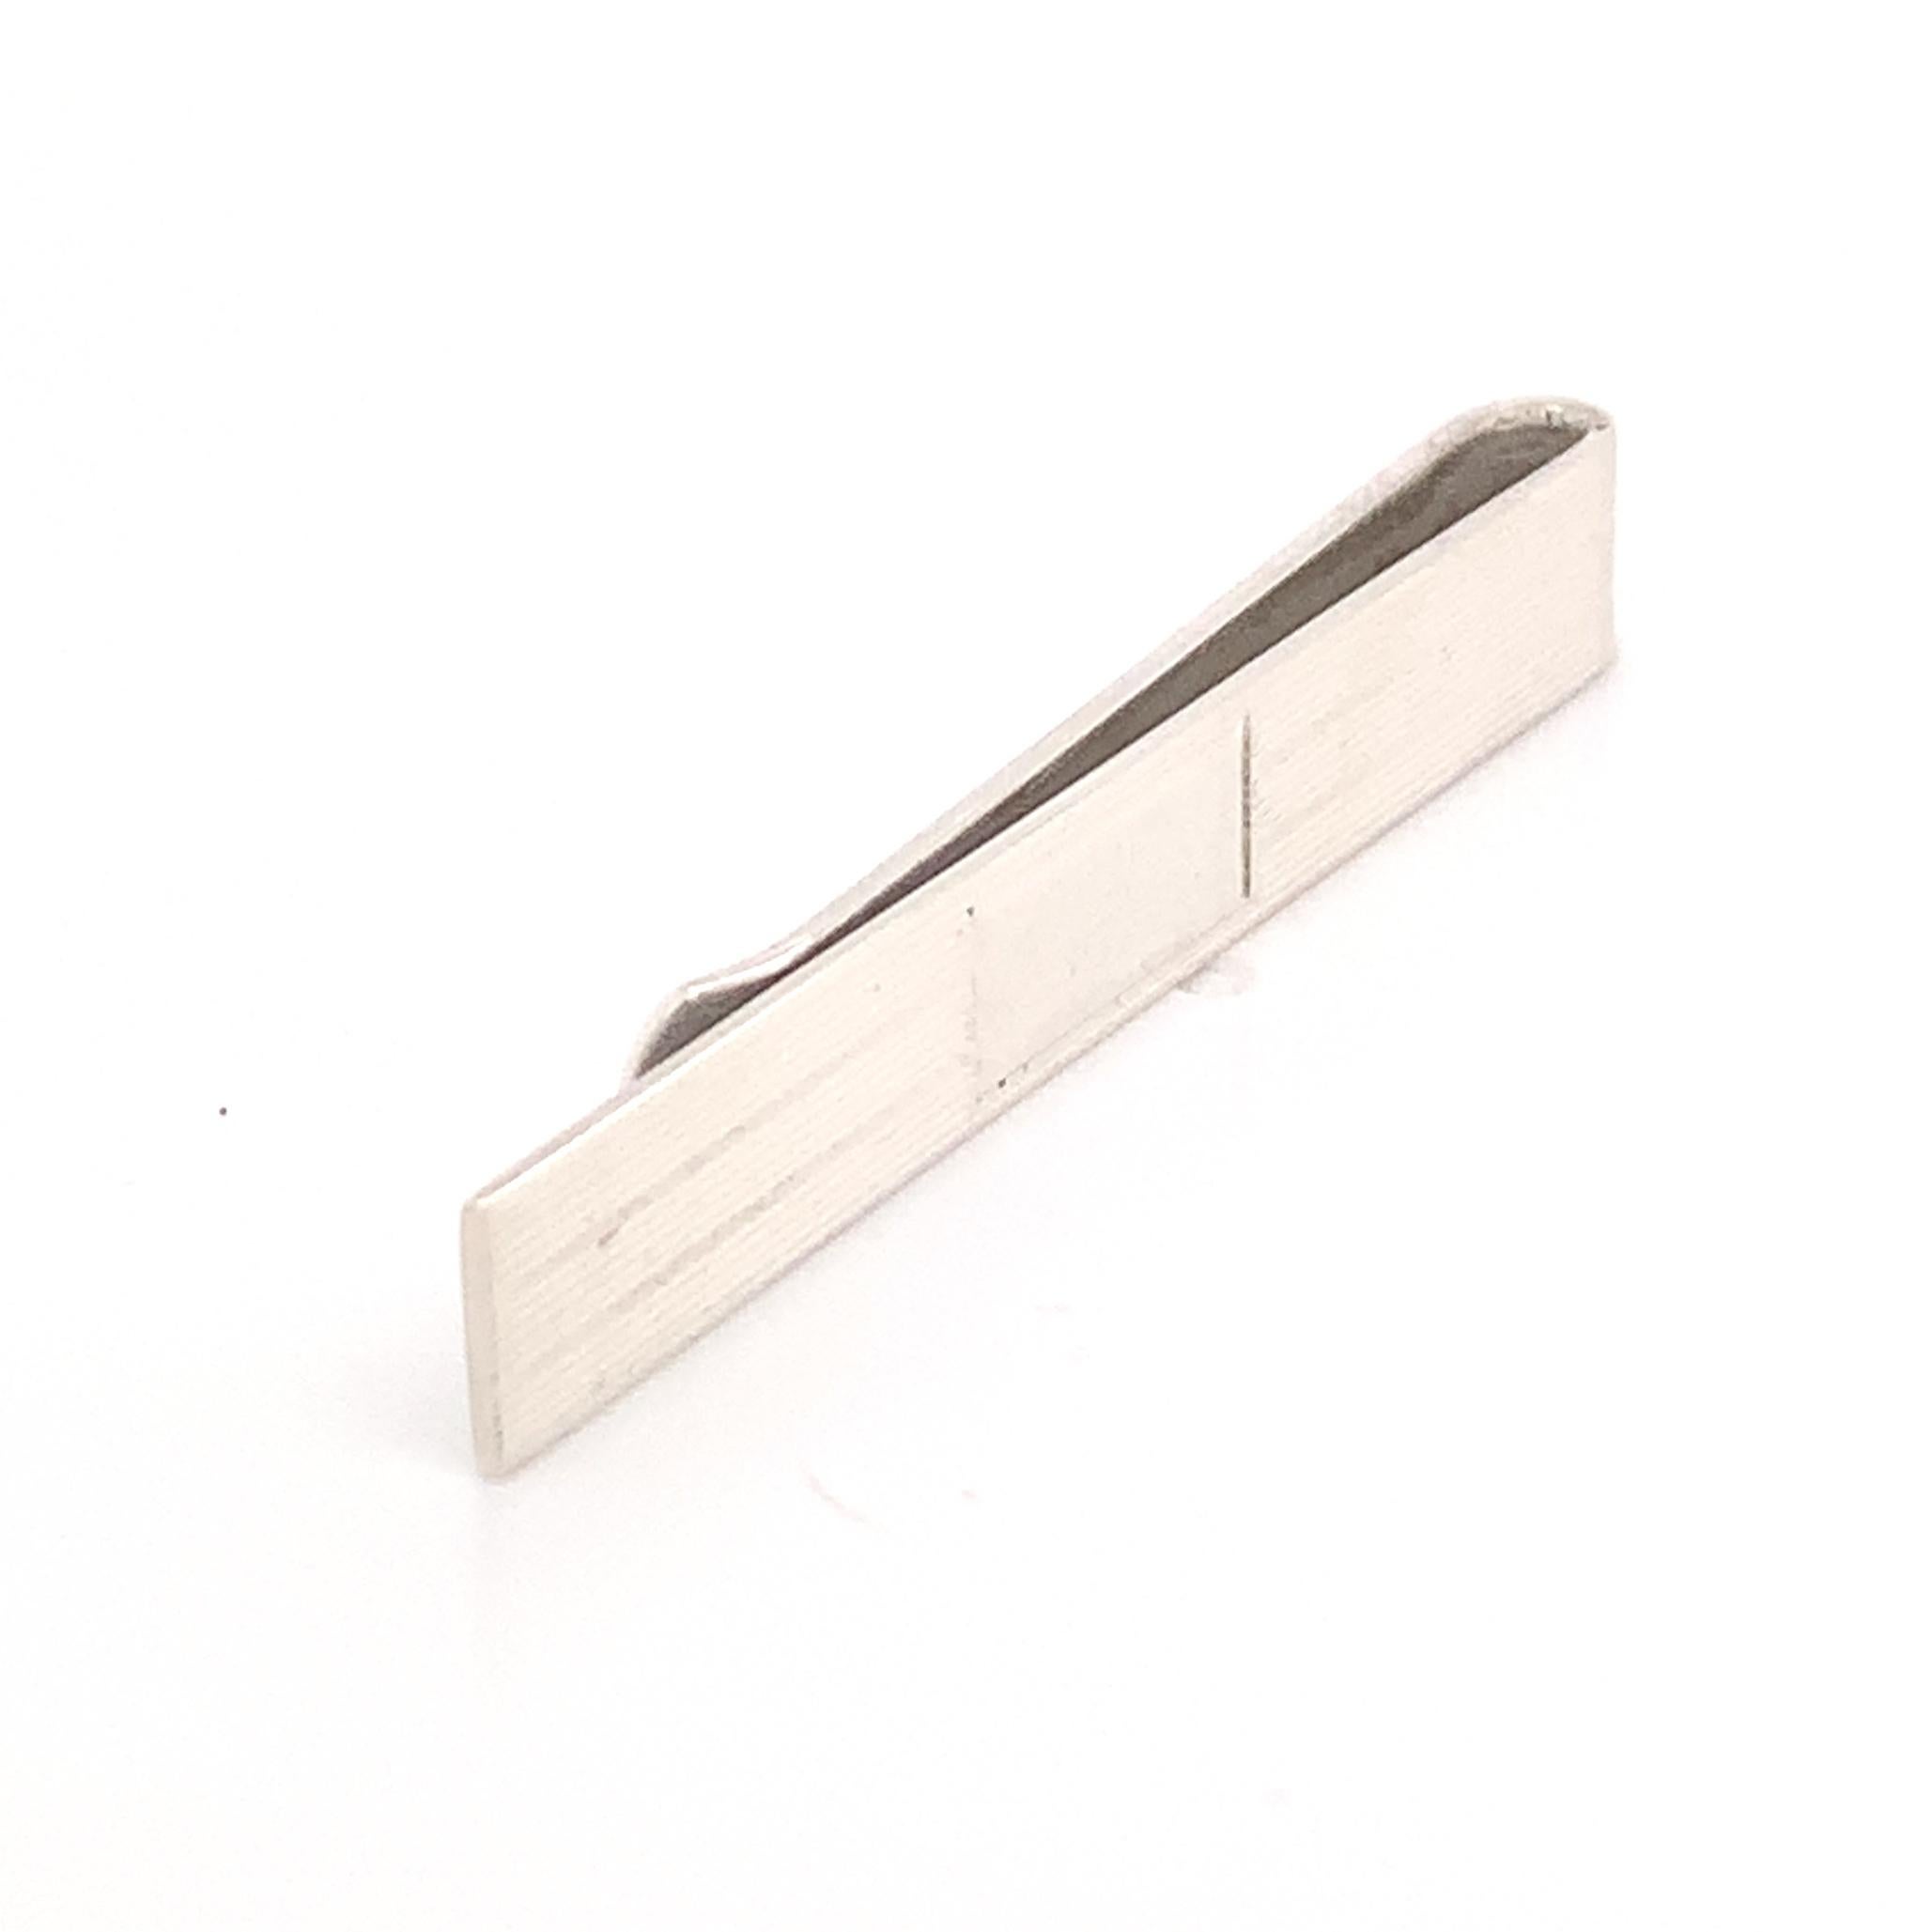 Tiffany & Co. Money Clip and Tie Clip Sterling Silver 925 TIF23

100% authentic guaranteed

Newly polished and looks like-new condition

We have taken many pictures at different angles for you to see how fabulous the condition of the money clip &